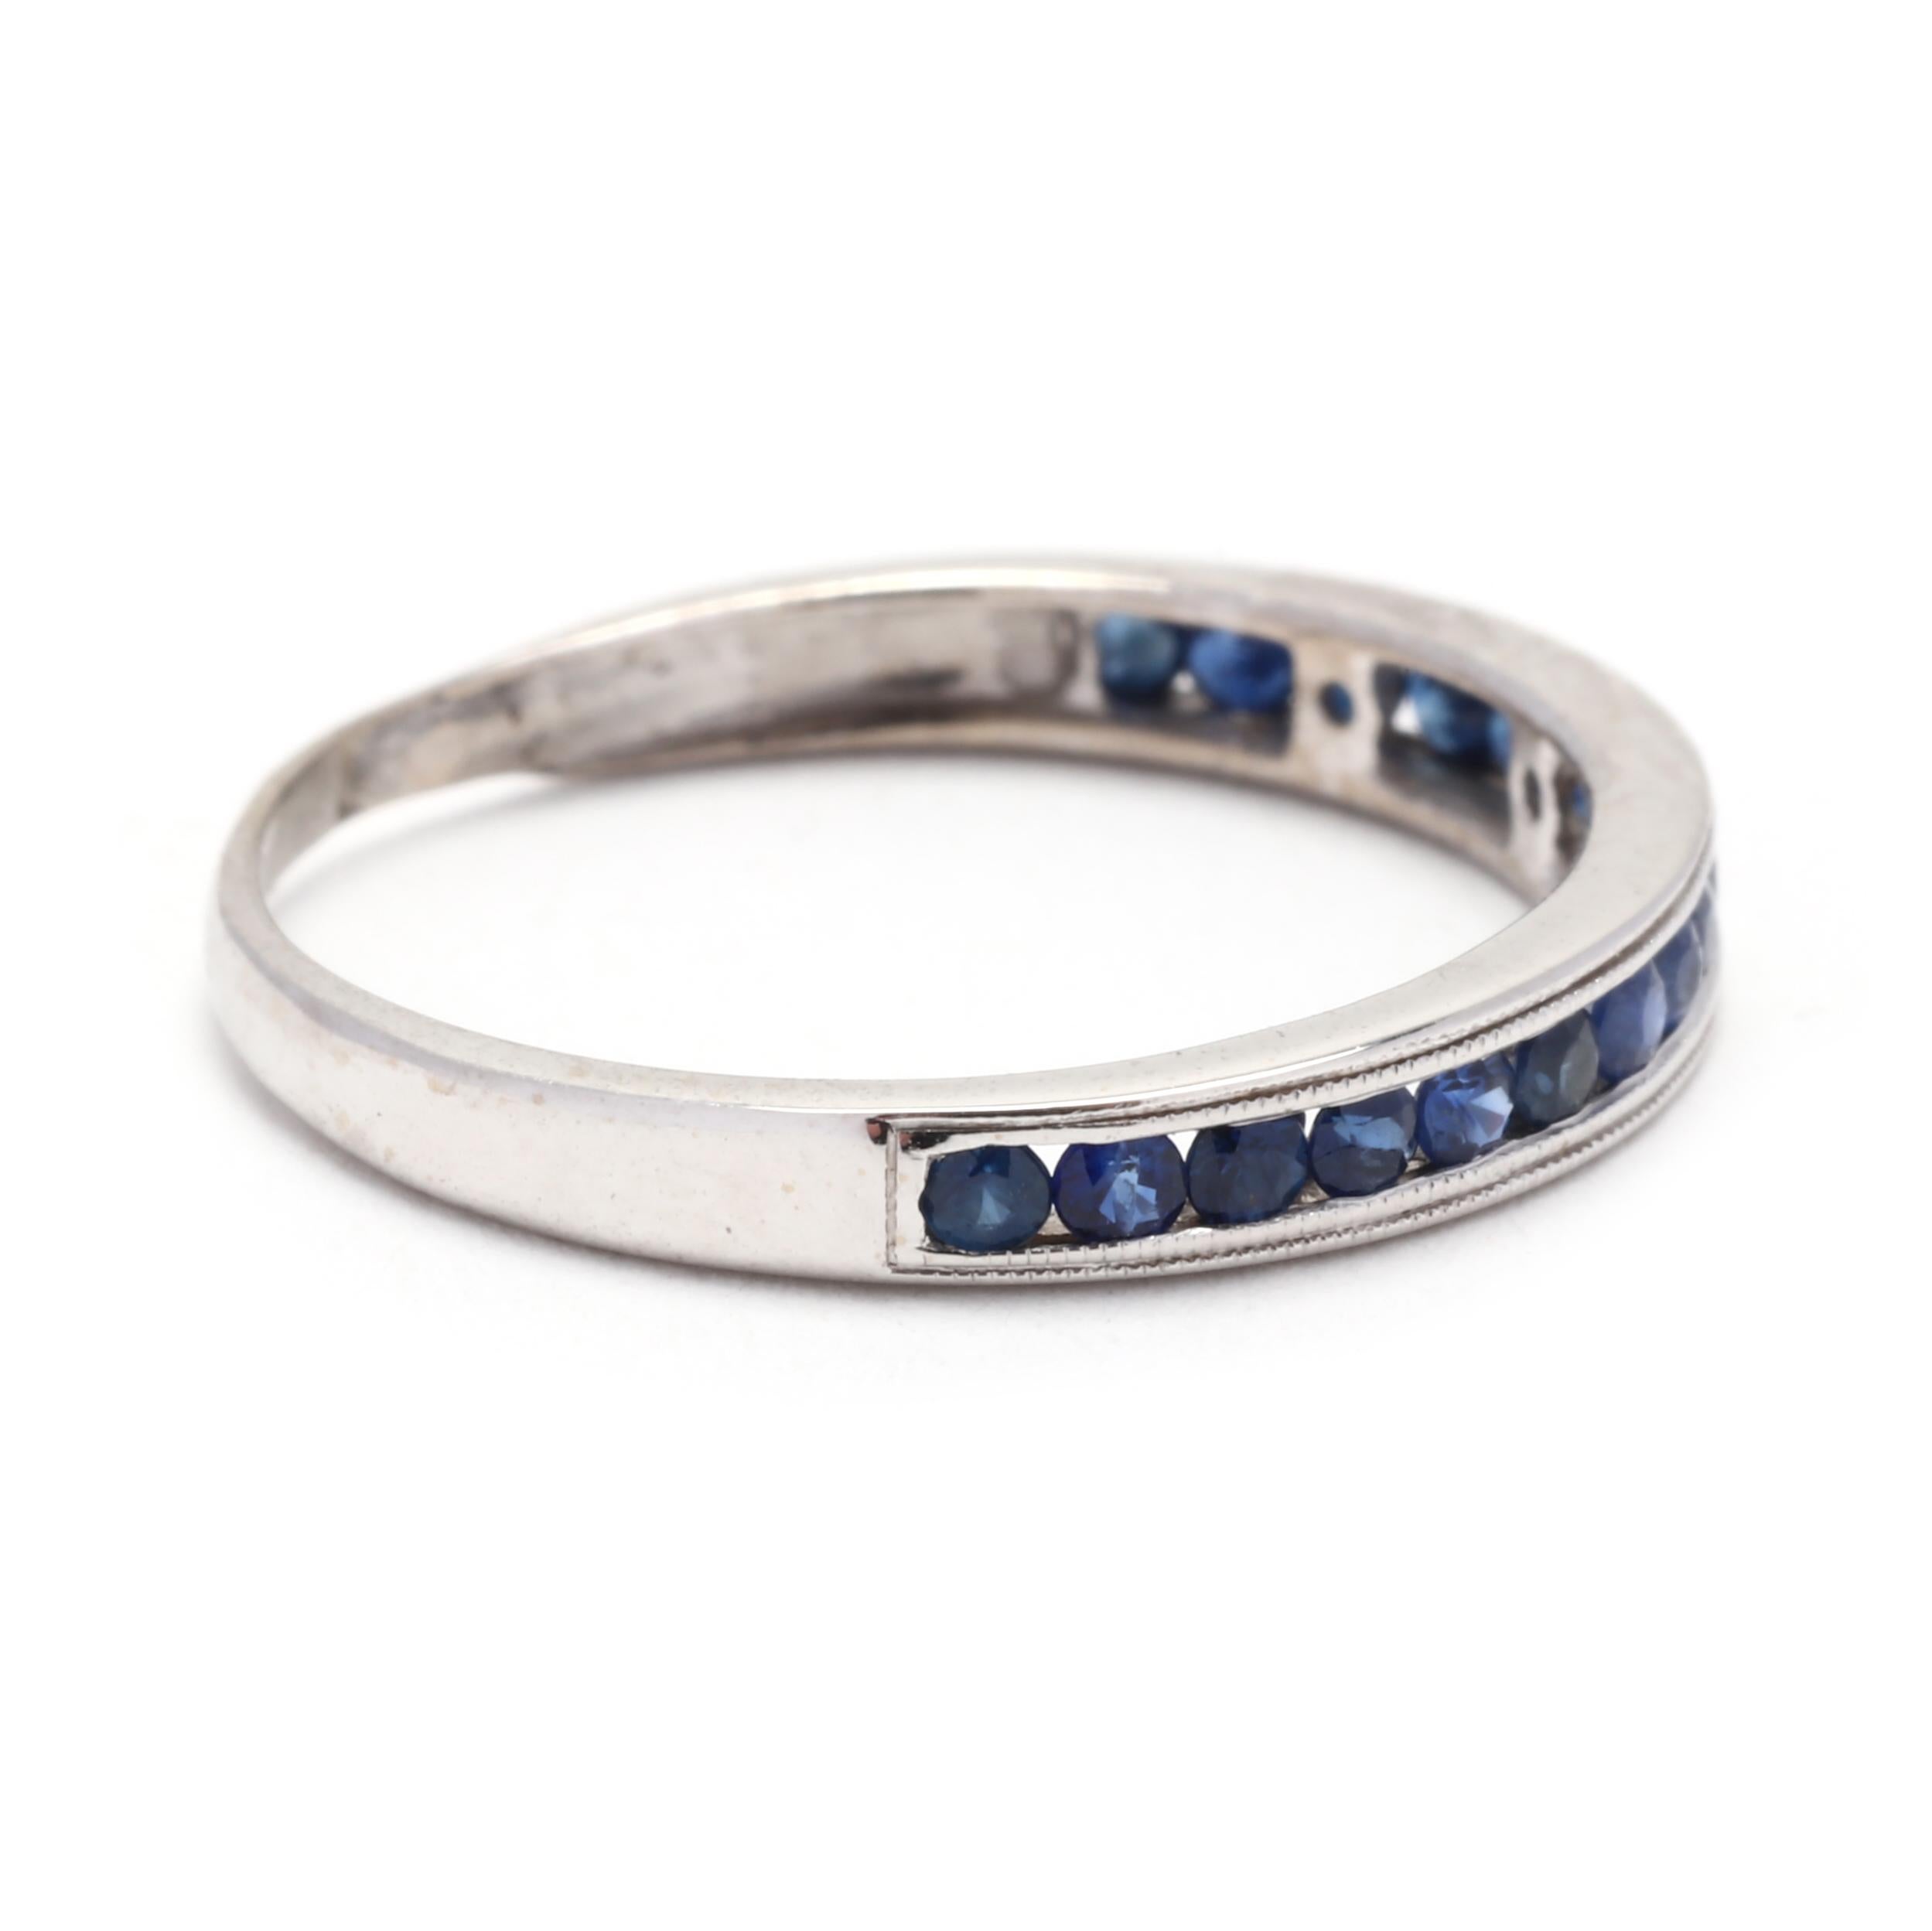 This 0.33ctw Sapphire Channel Set Milgrain Wedding Band is a stunning choice for those seeking a unique and elegant wedding band. Made from 14K white gold, this band features a series of channel-set sapphires with milgrain detailing along the edges,